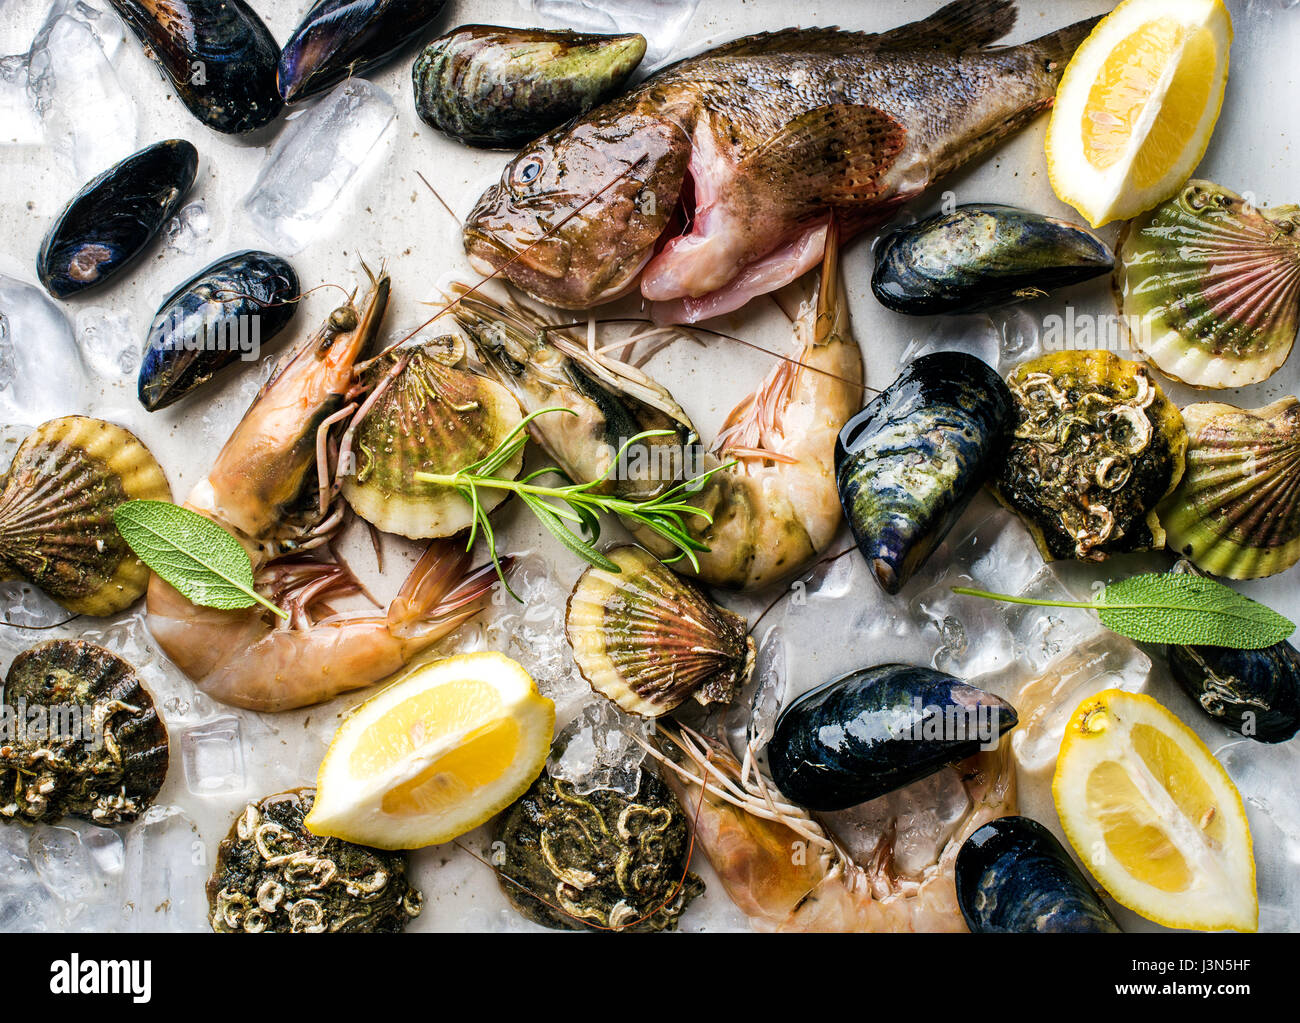 Fresh seafood with herbs and lemon on ice. Prawns, fish, mussels, scallops over steel metal tray Stock Photo